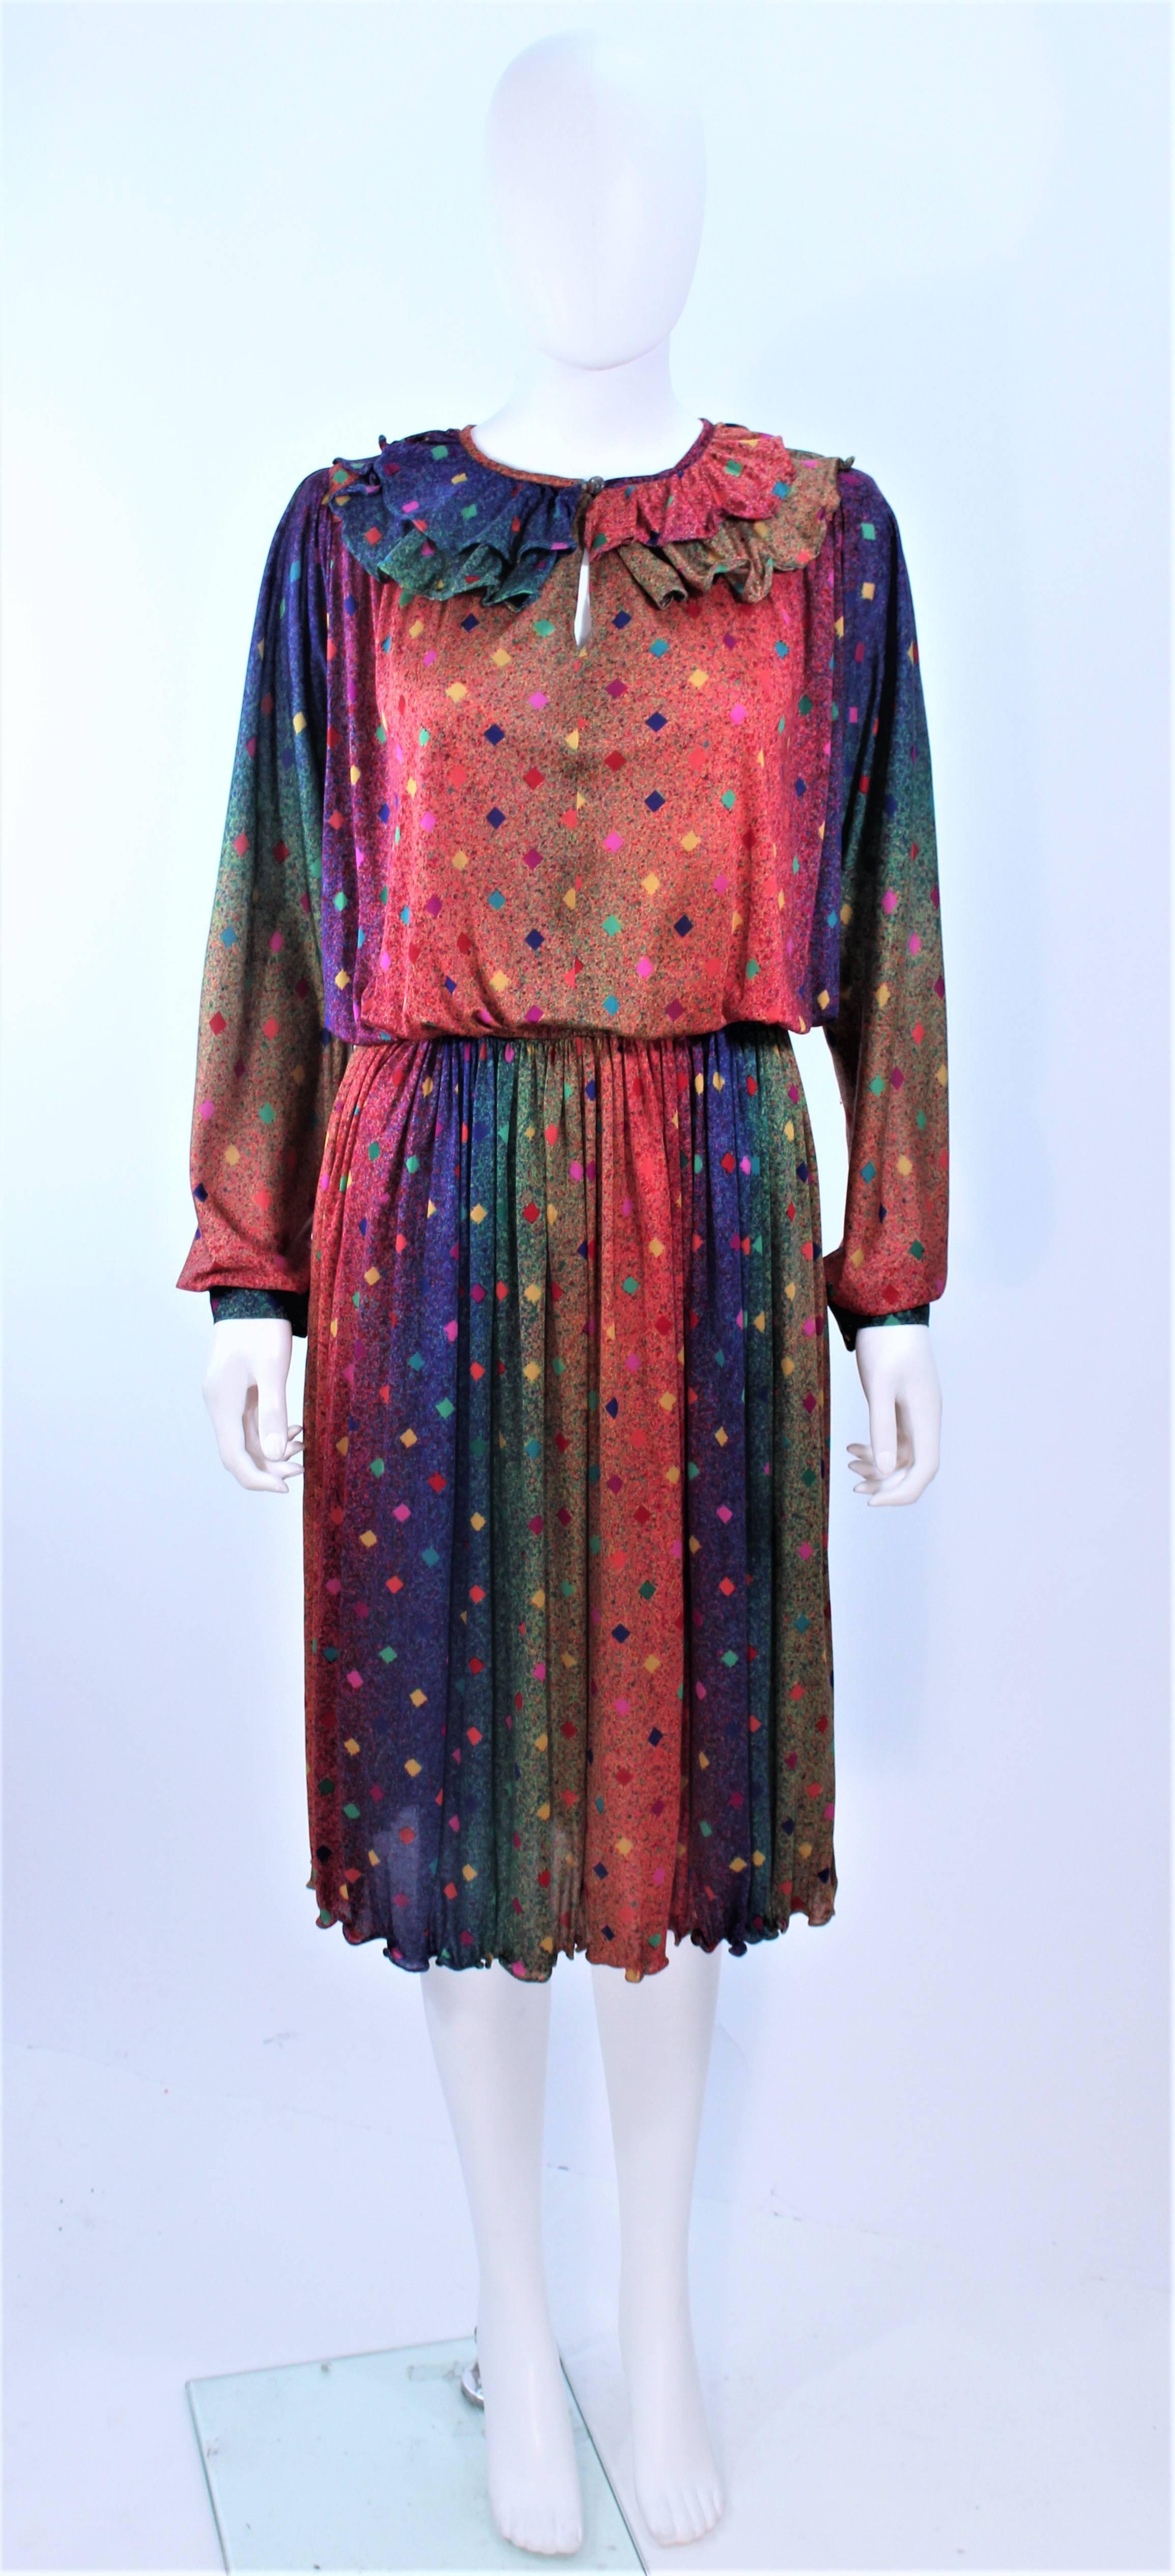 This Missoni design is composed of a rainbow printed silk. Features a ruffled neck with a center front button and elastic waist detail. In excellent vintage condition.

**Please cross-reference measurements for personal accuracy. Size in